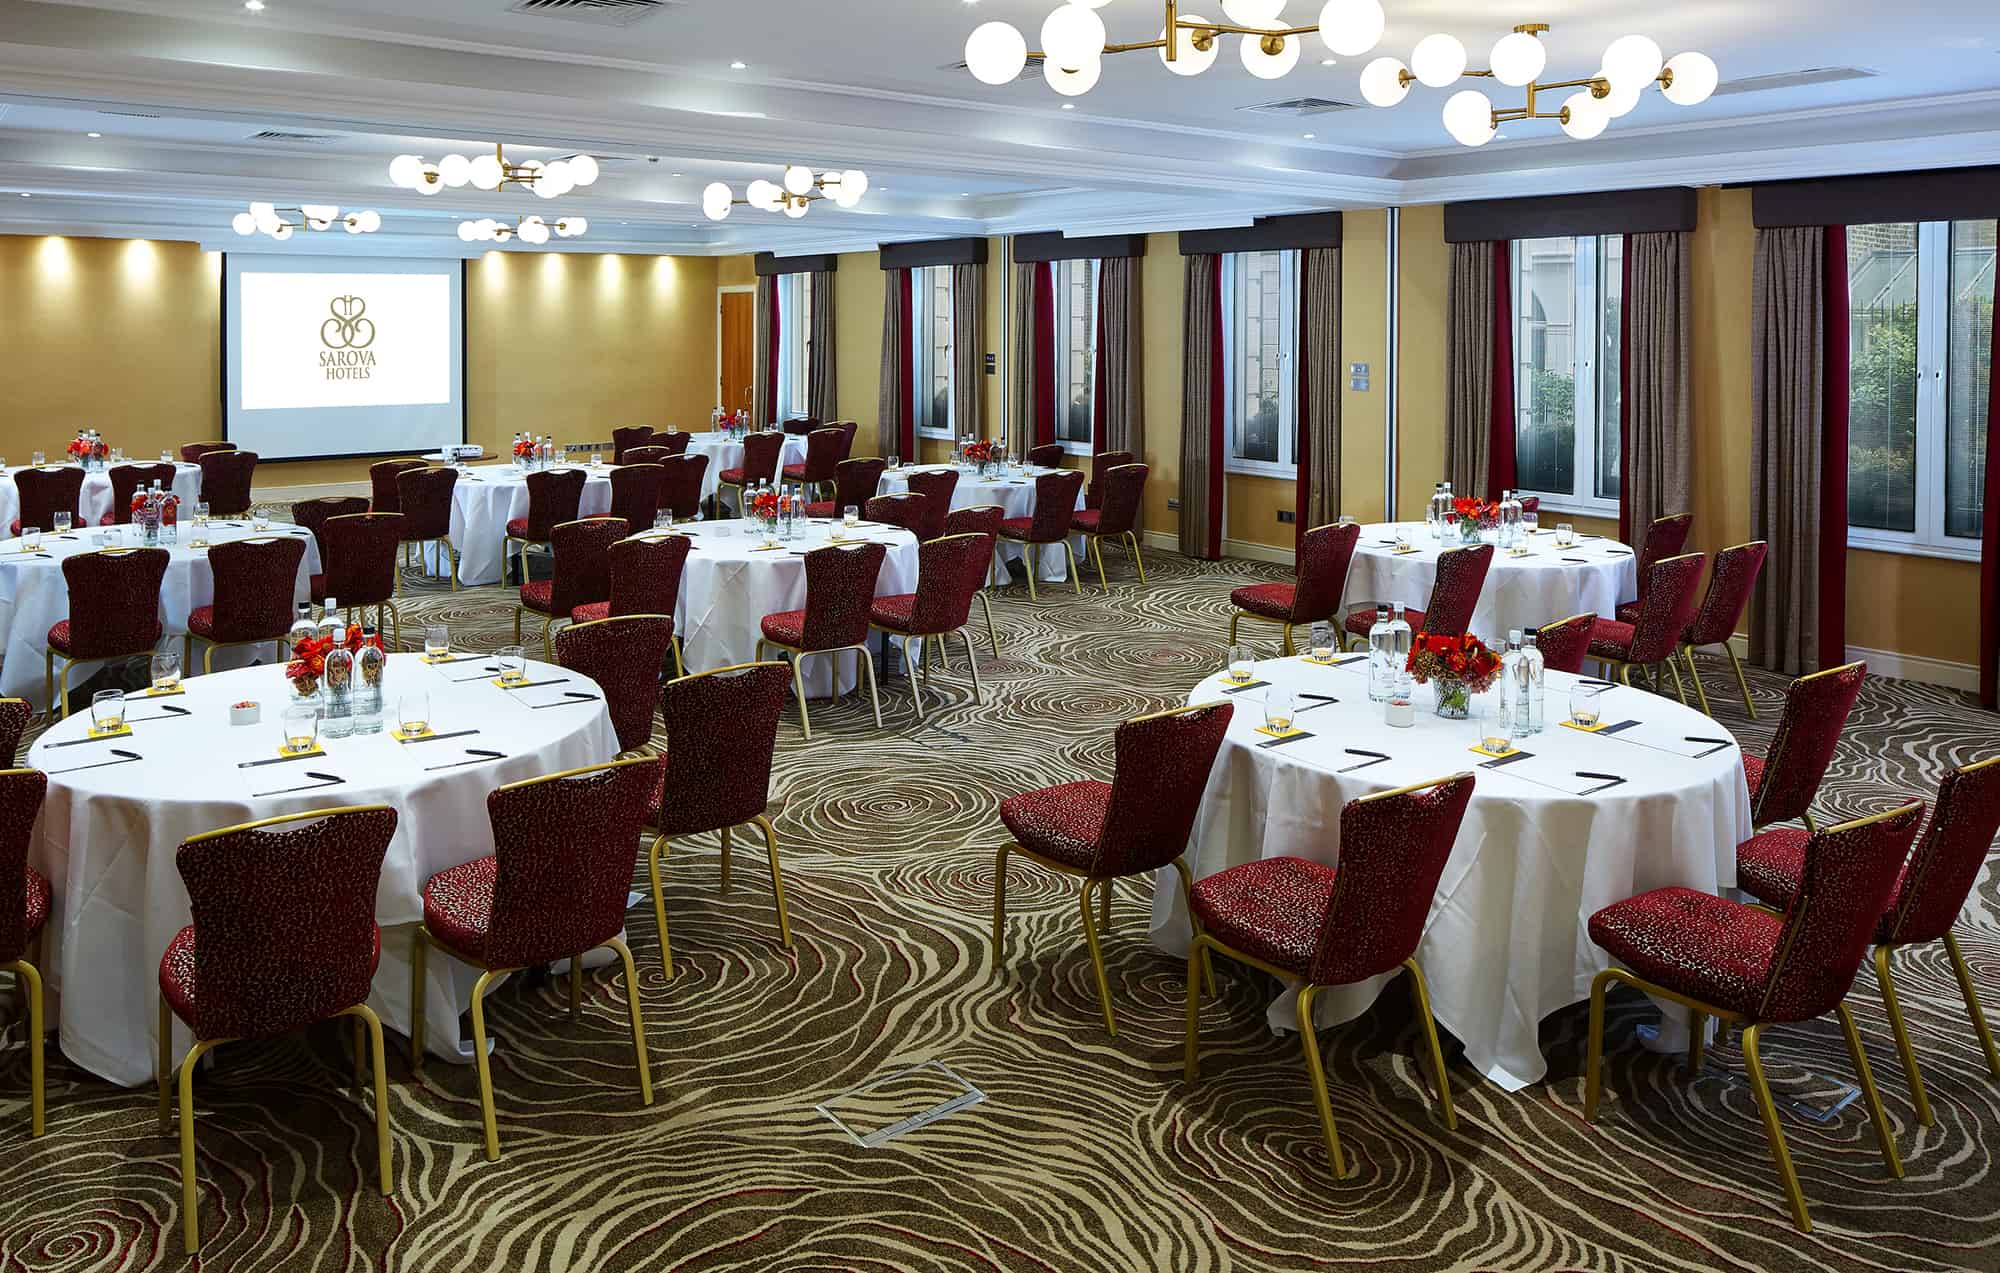 How to Select the Best Hotel Meeting Spaces for Your Next Event